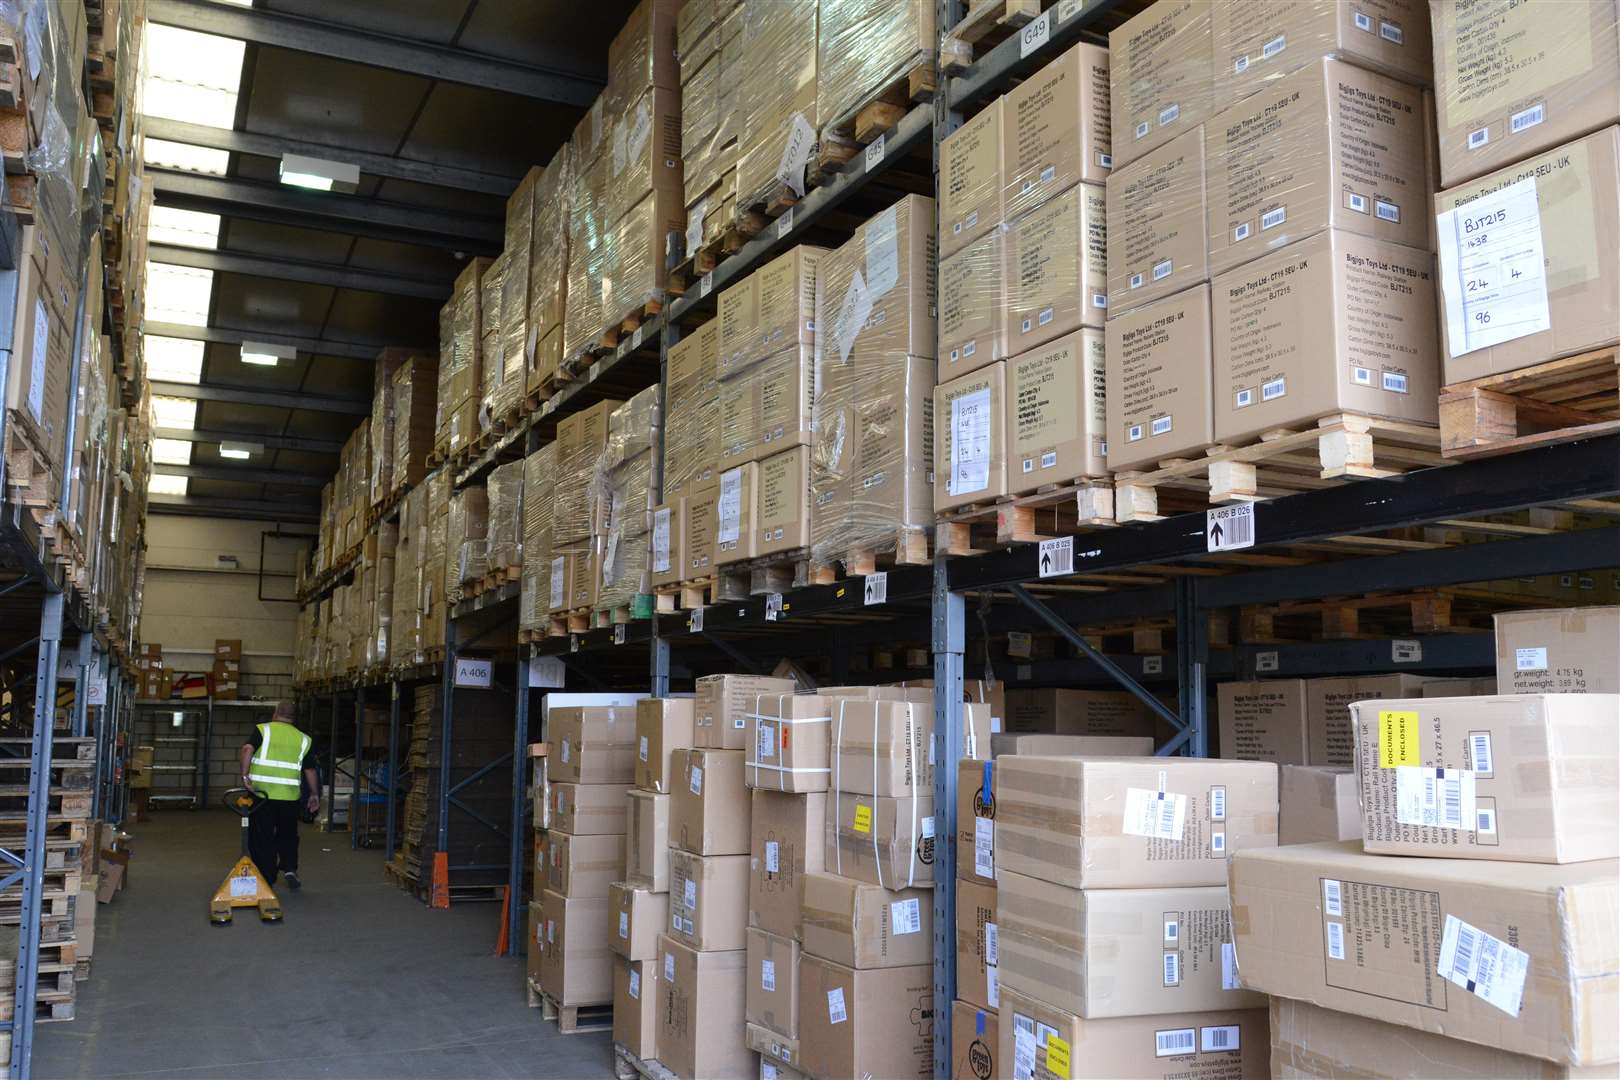 The warehouse staff are busy finding and distributing orders before Christmas